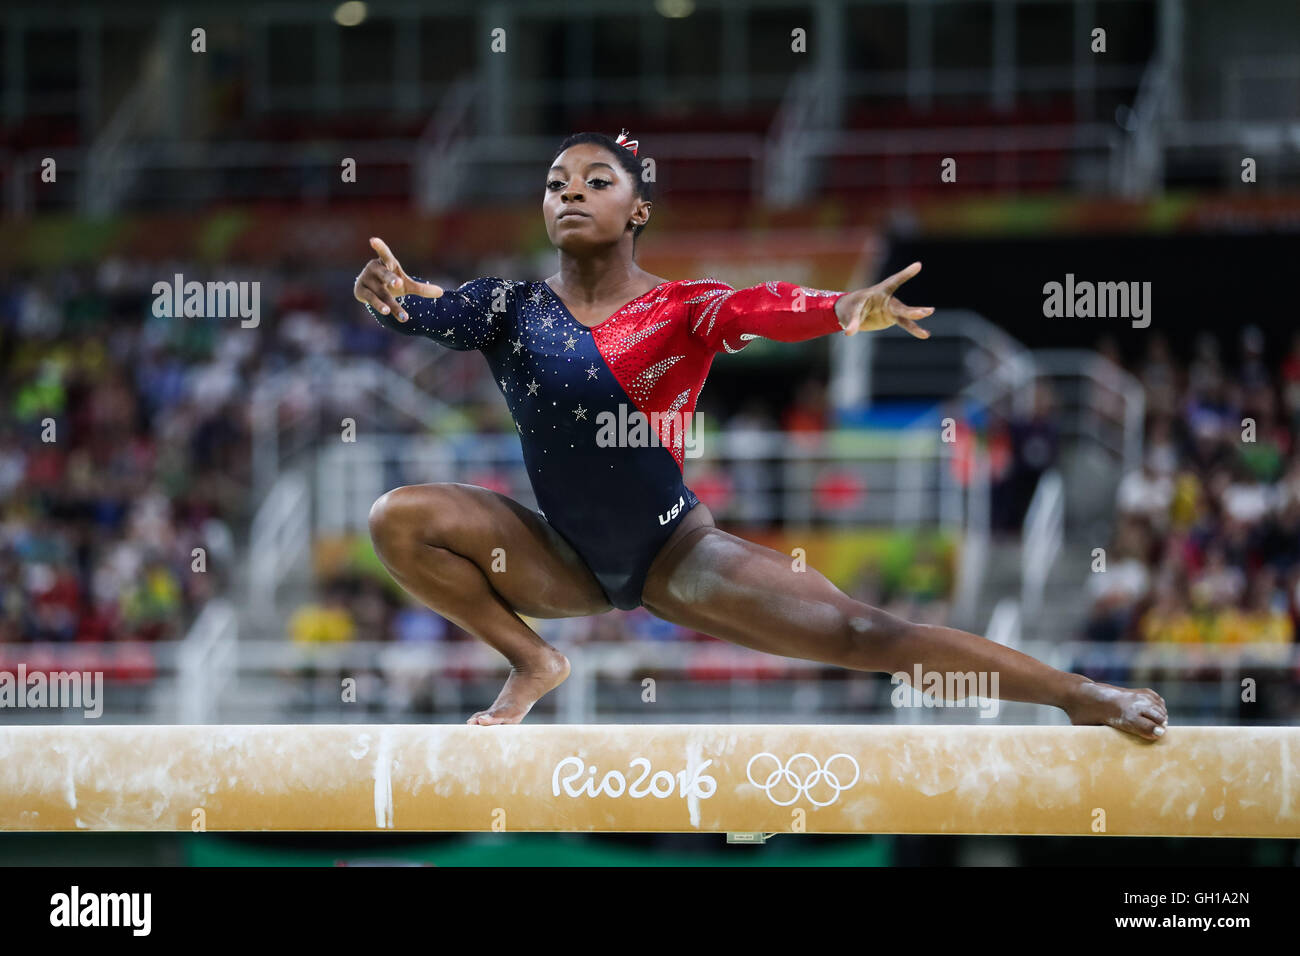 Rio de Janeiro, Brazil. 07th Aug, 2016. Simone Biles of the United States acts during women's qualification match of balance Beam of Artistic Gymnastics at the 2016 Rio Olympic Games in Rio de Janeiro, Brazil, on Aug. 7, 2016.?Xinhua/Zheng Huansong?(xr) Credit:  Xinhua/Alamy Live News Stock Photo